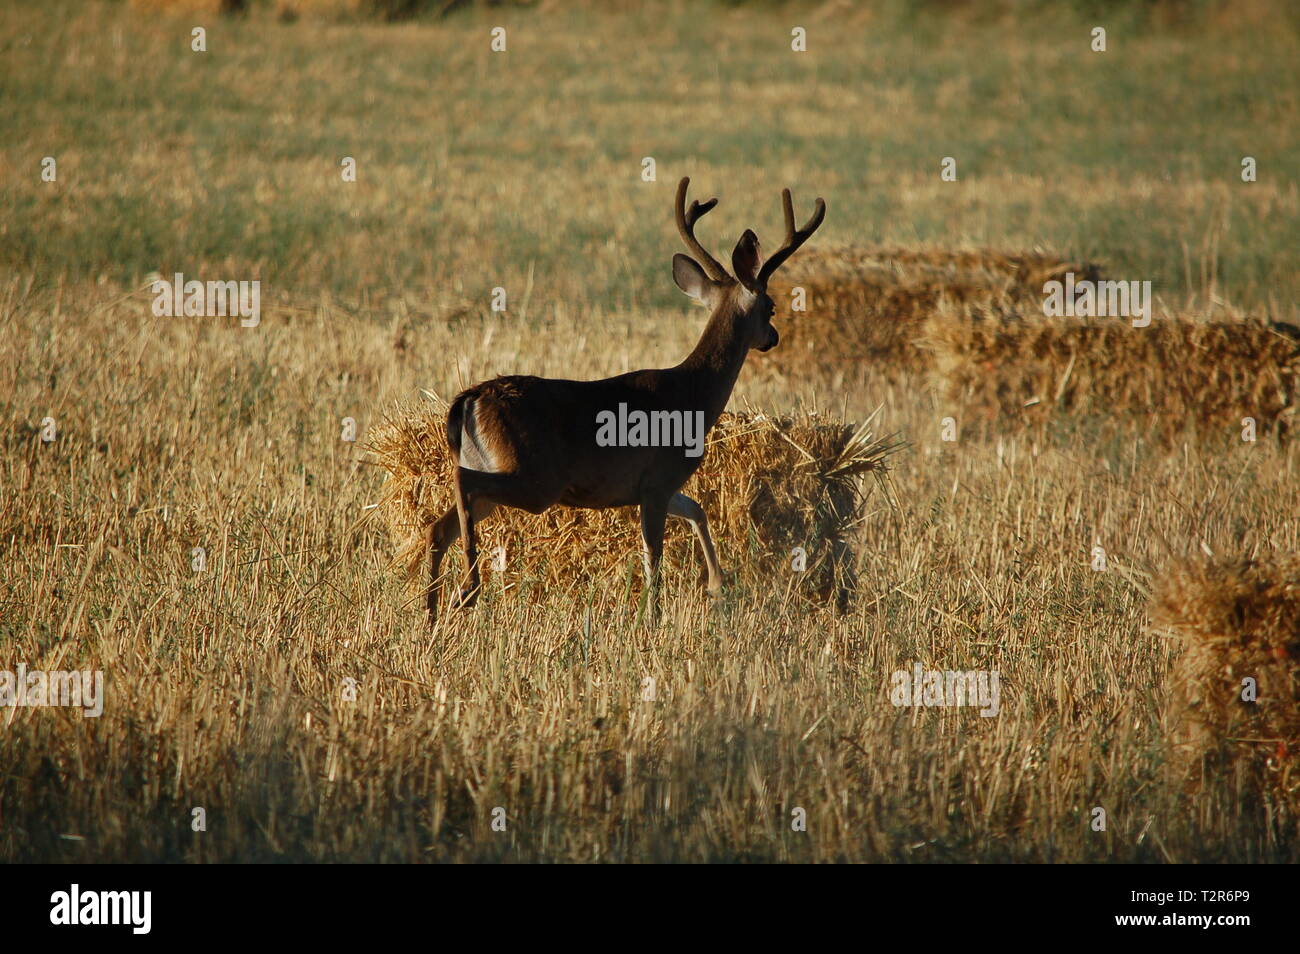 A Blacktail Deer roams through a hay field in the Bitterwater Valley. The buck's antlers are covered in velvet. Stock Photo